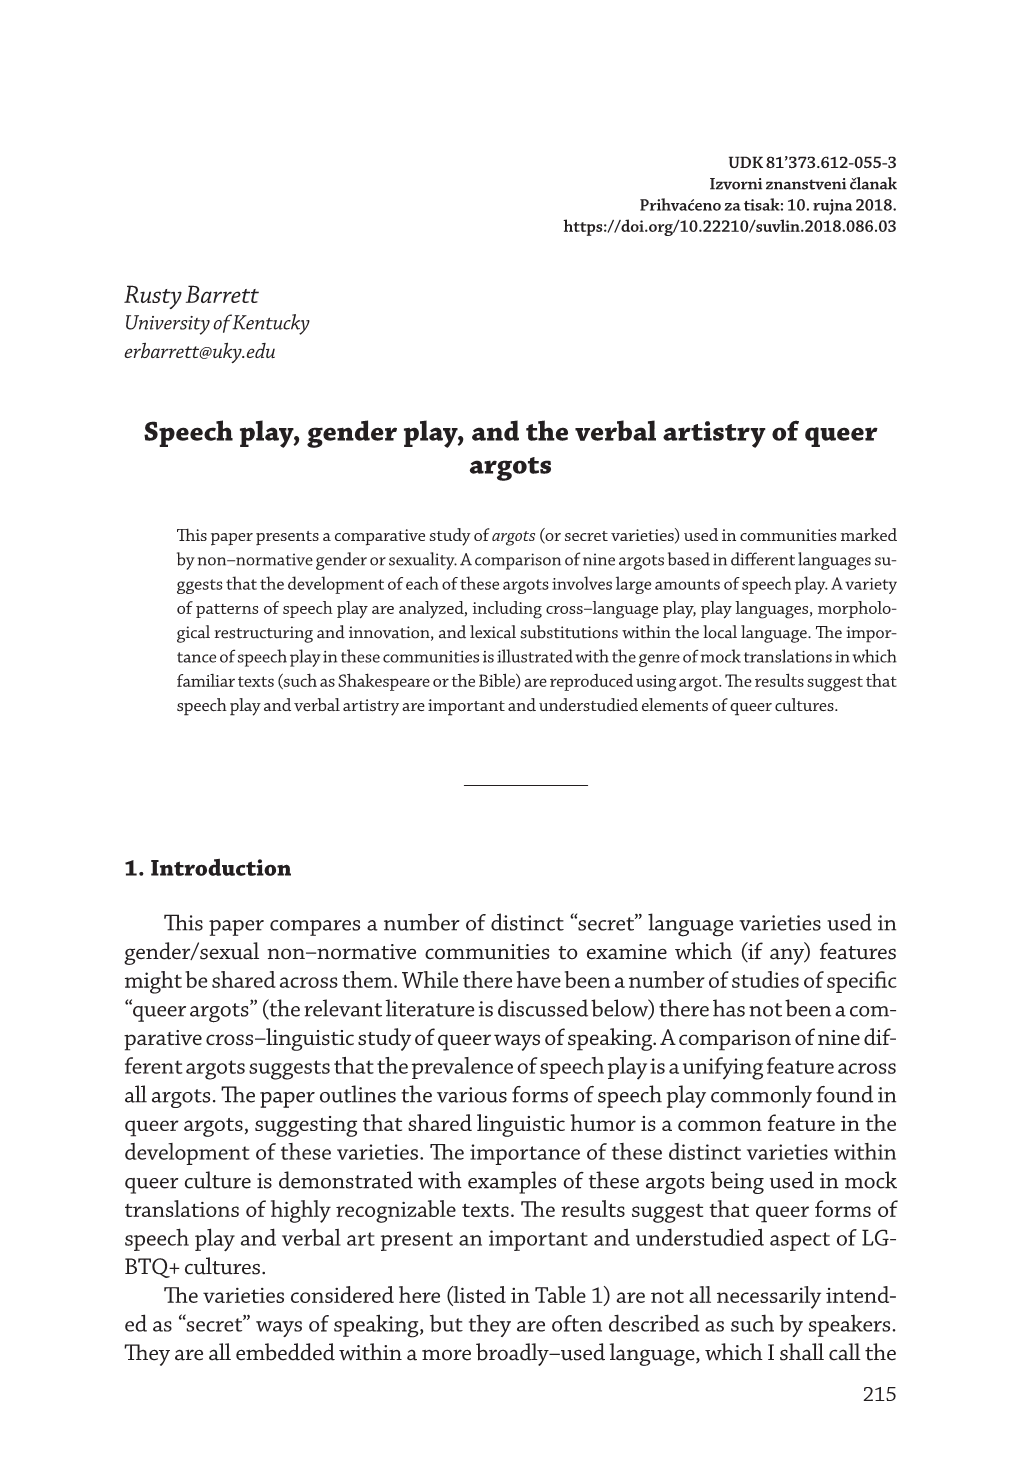 Speech Play, Gender Play, and the Verbal Artistry of Queer Argots